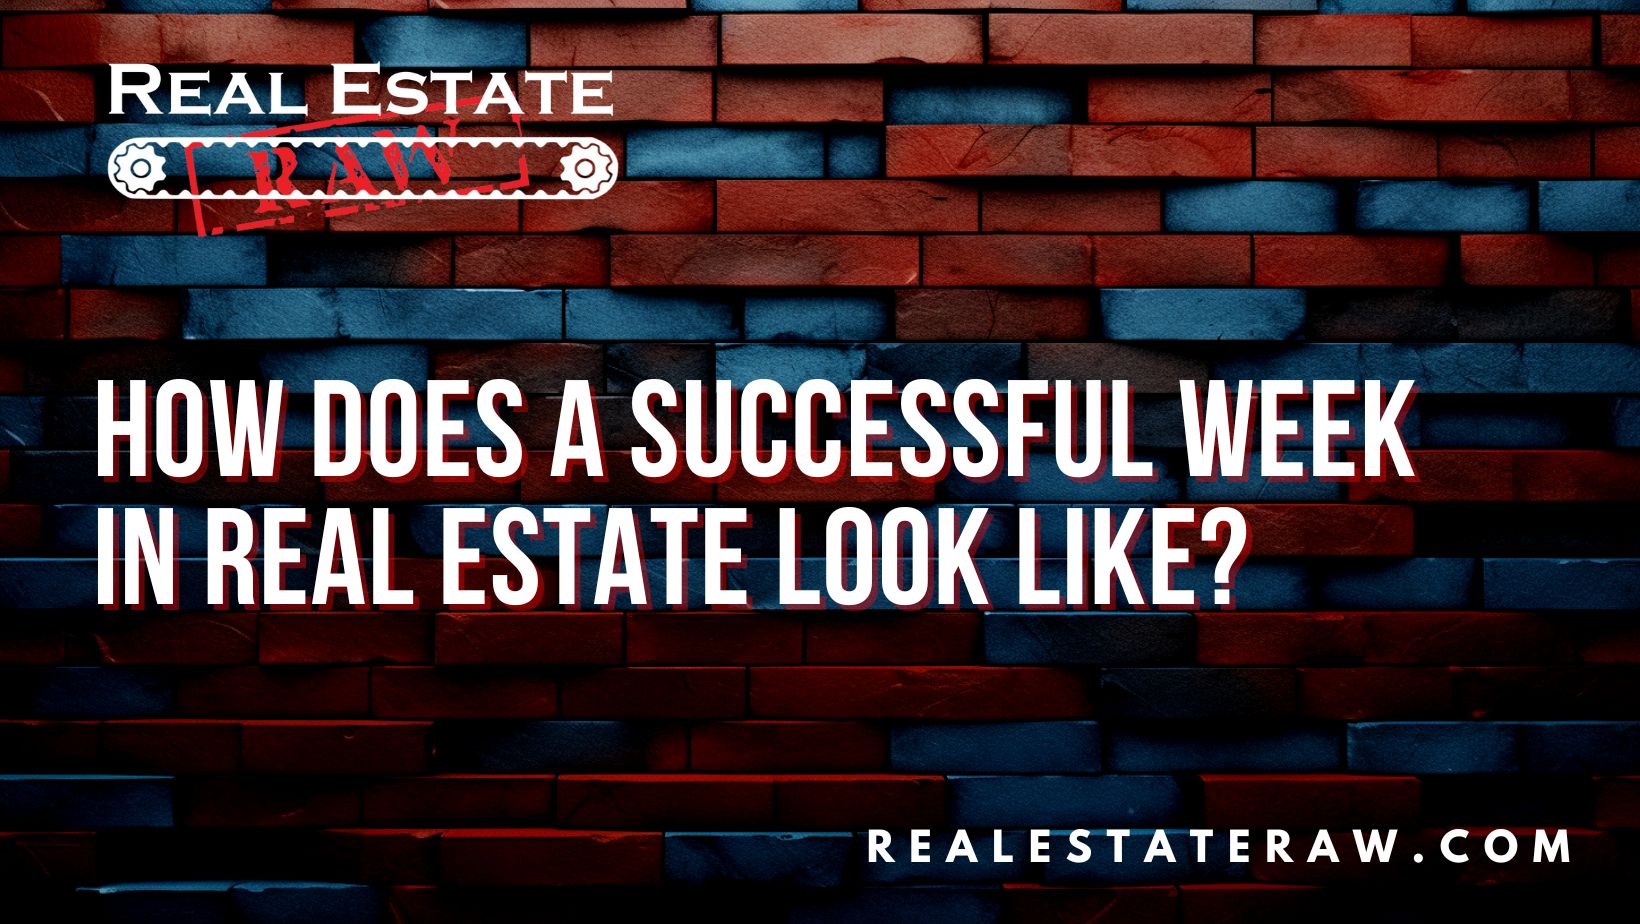 5 Steps to A Successful Week in Real Estate